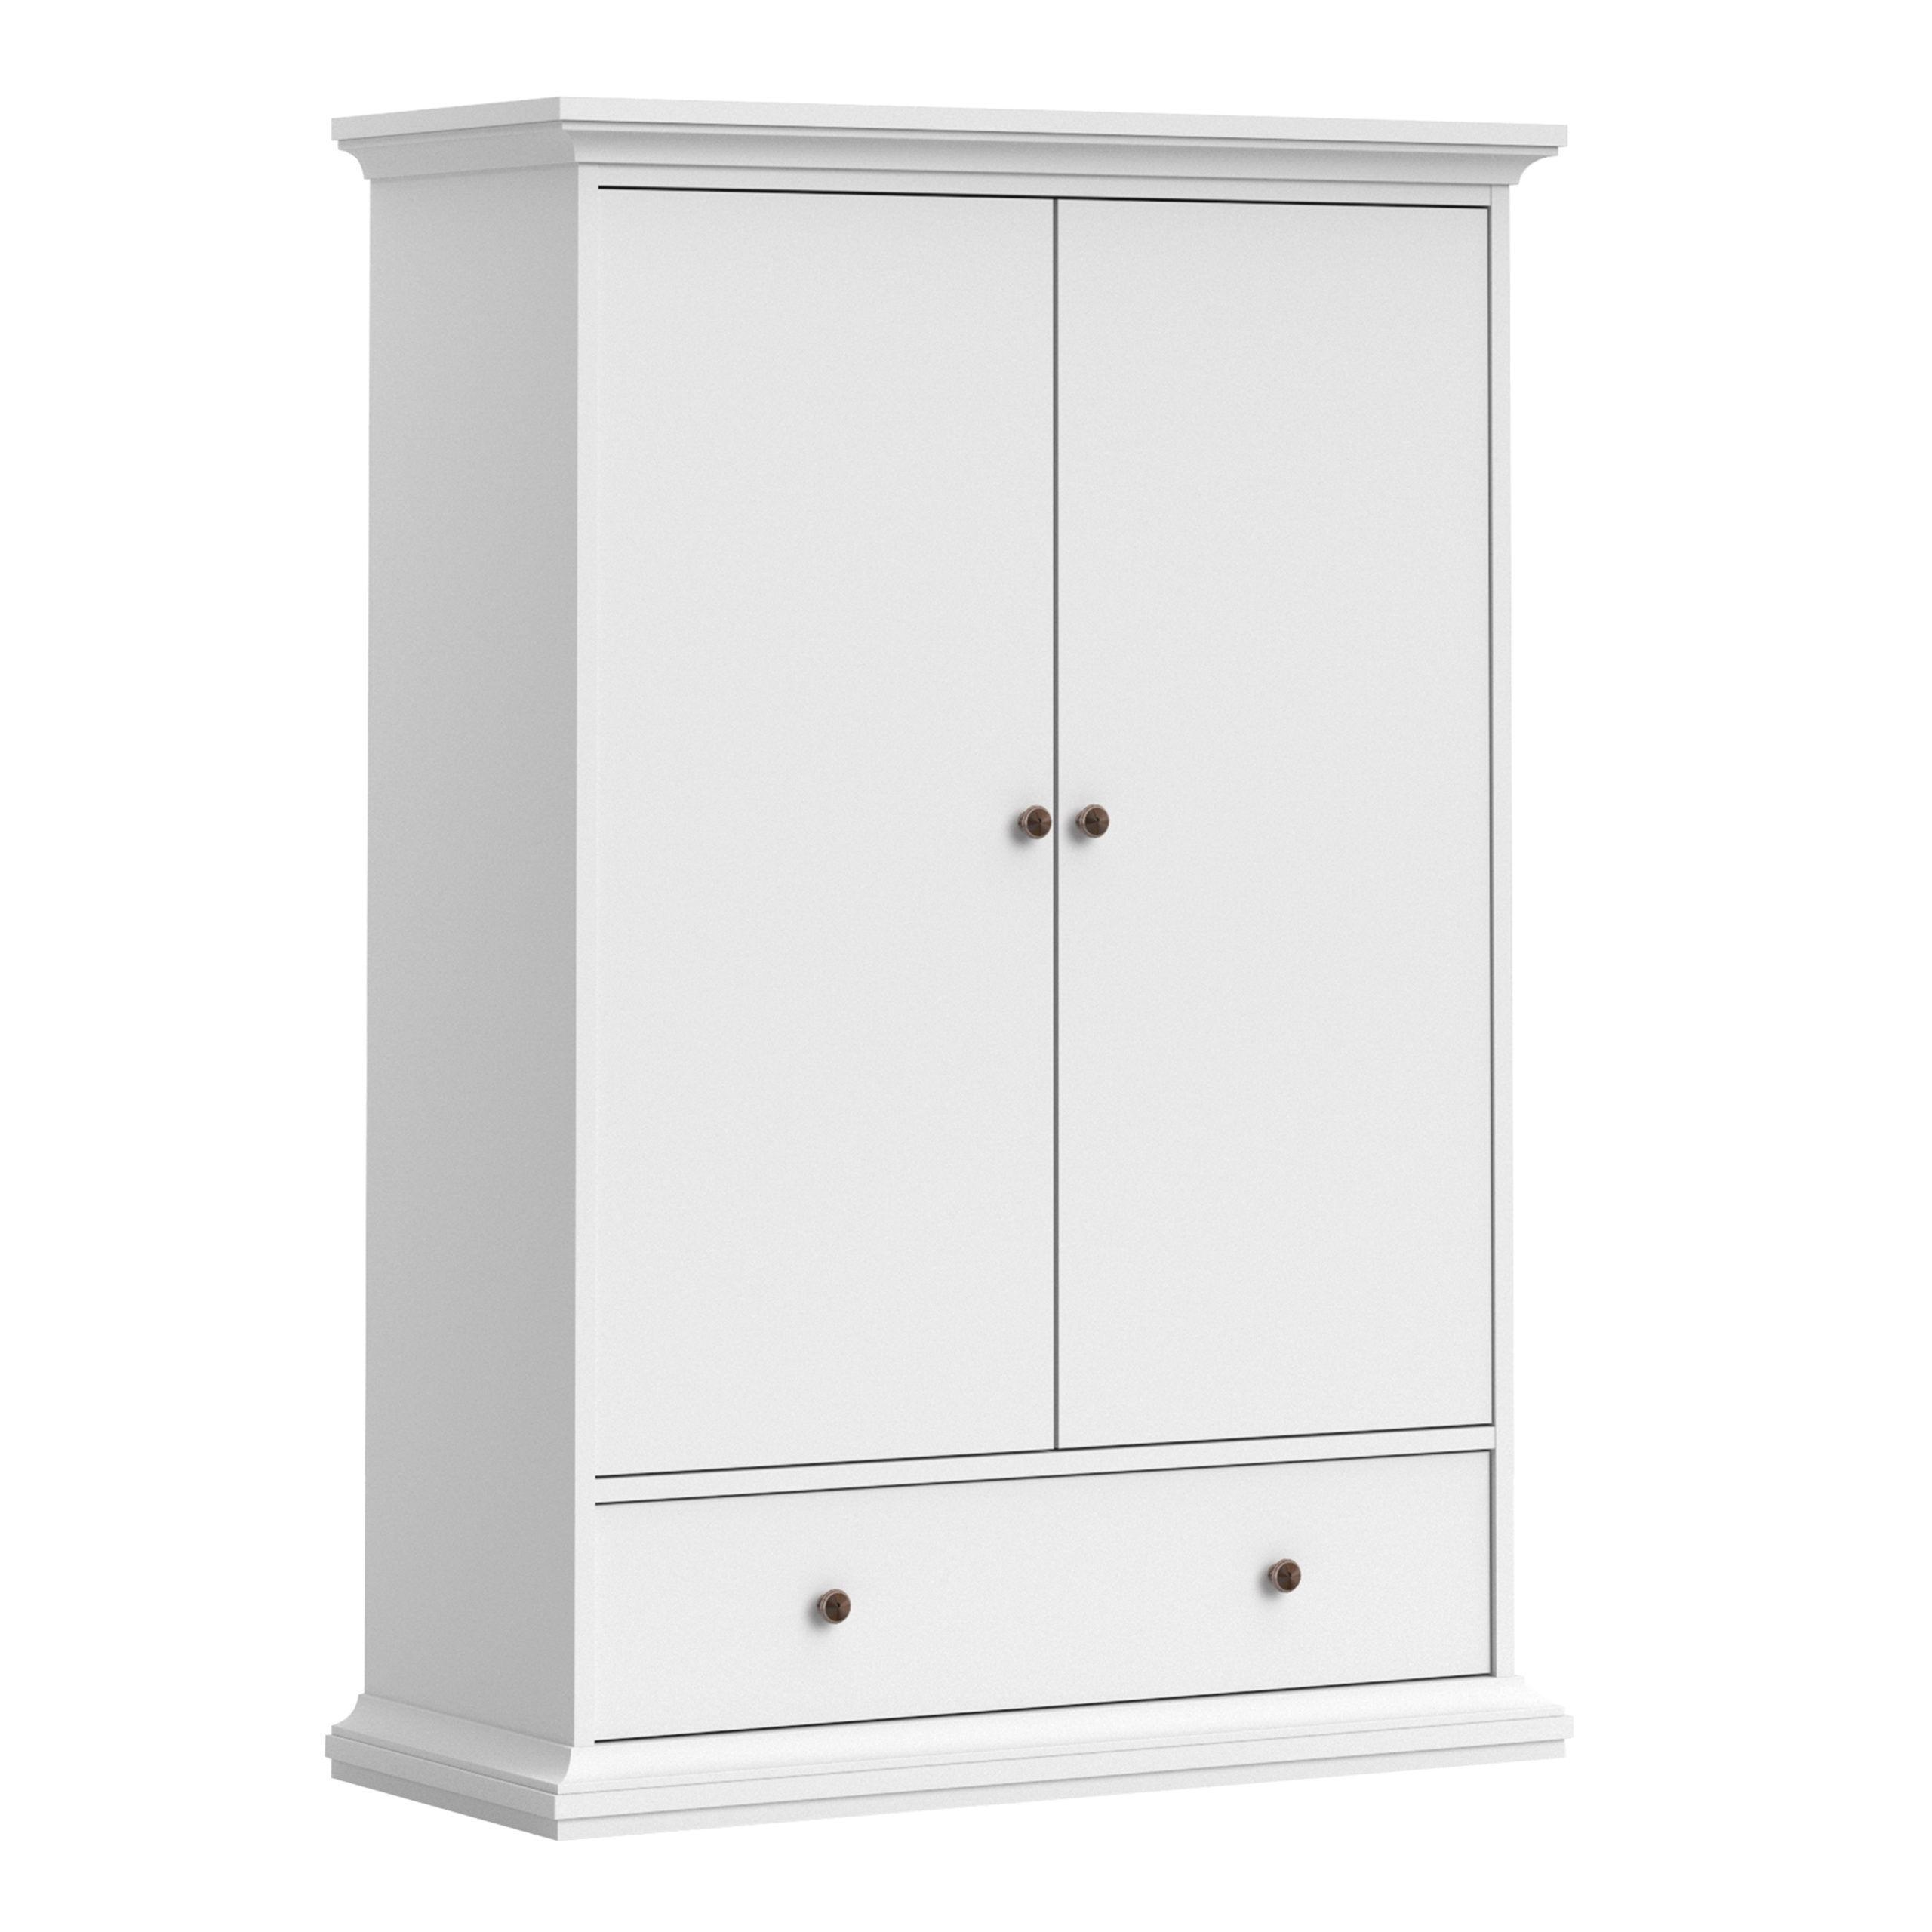 Condo Wardrobe with 2 Doors 1 Drawer 2 Shelves   White   Self Assembly